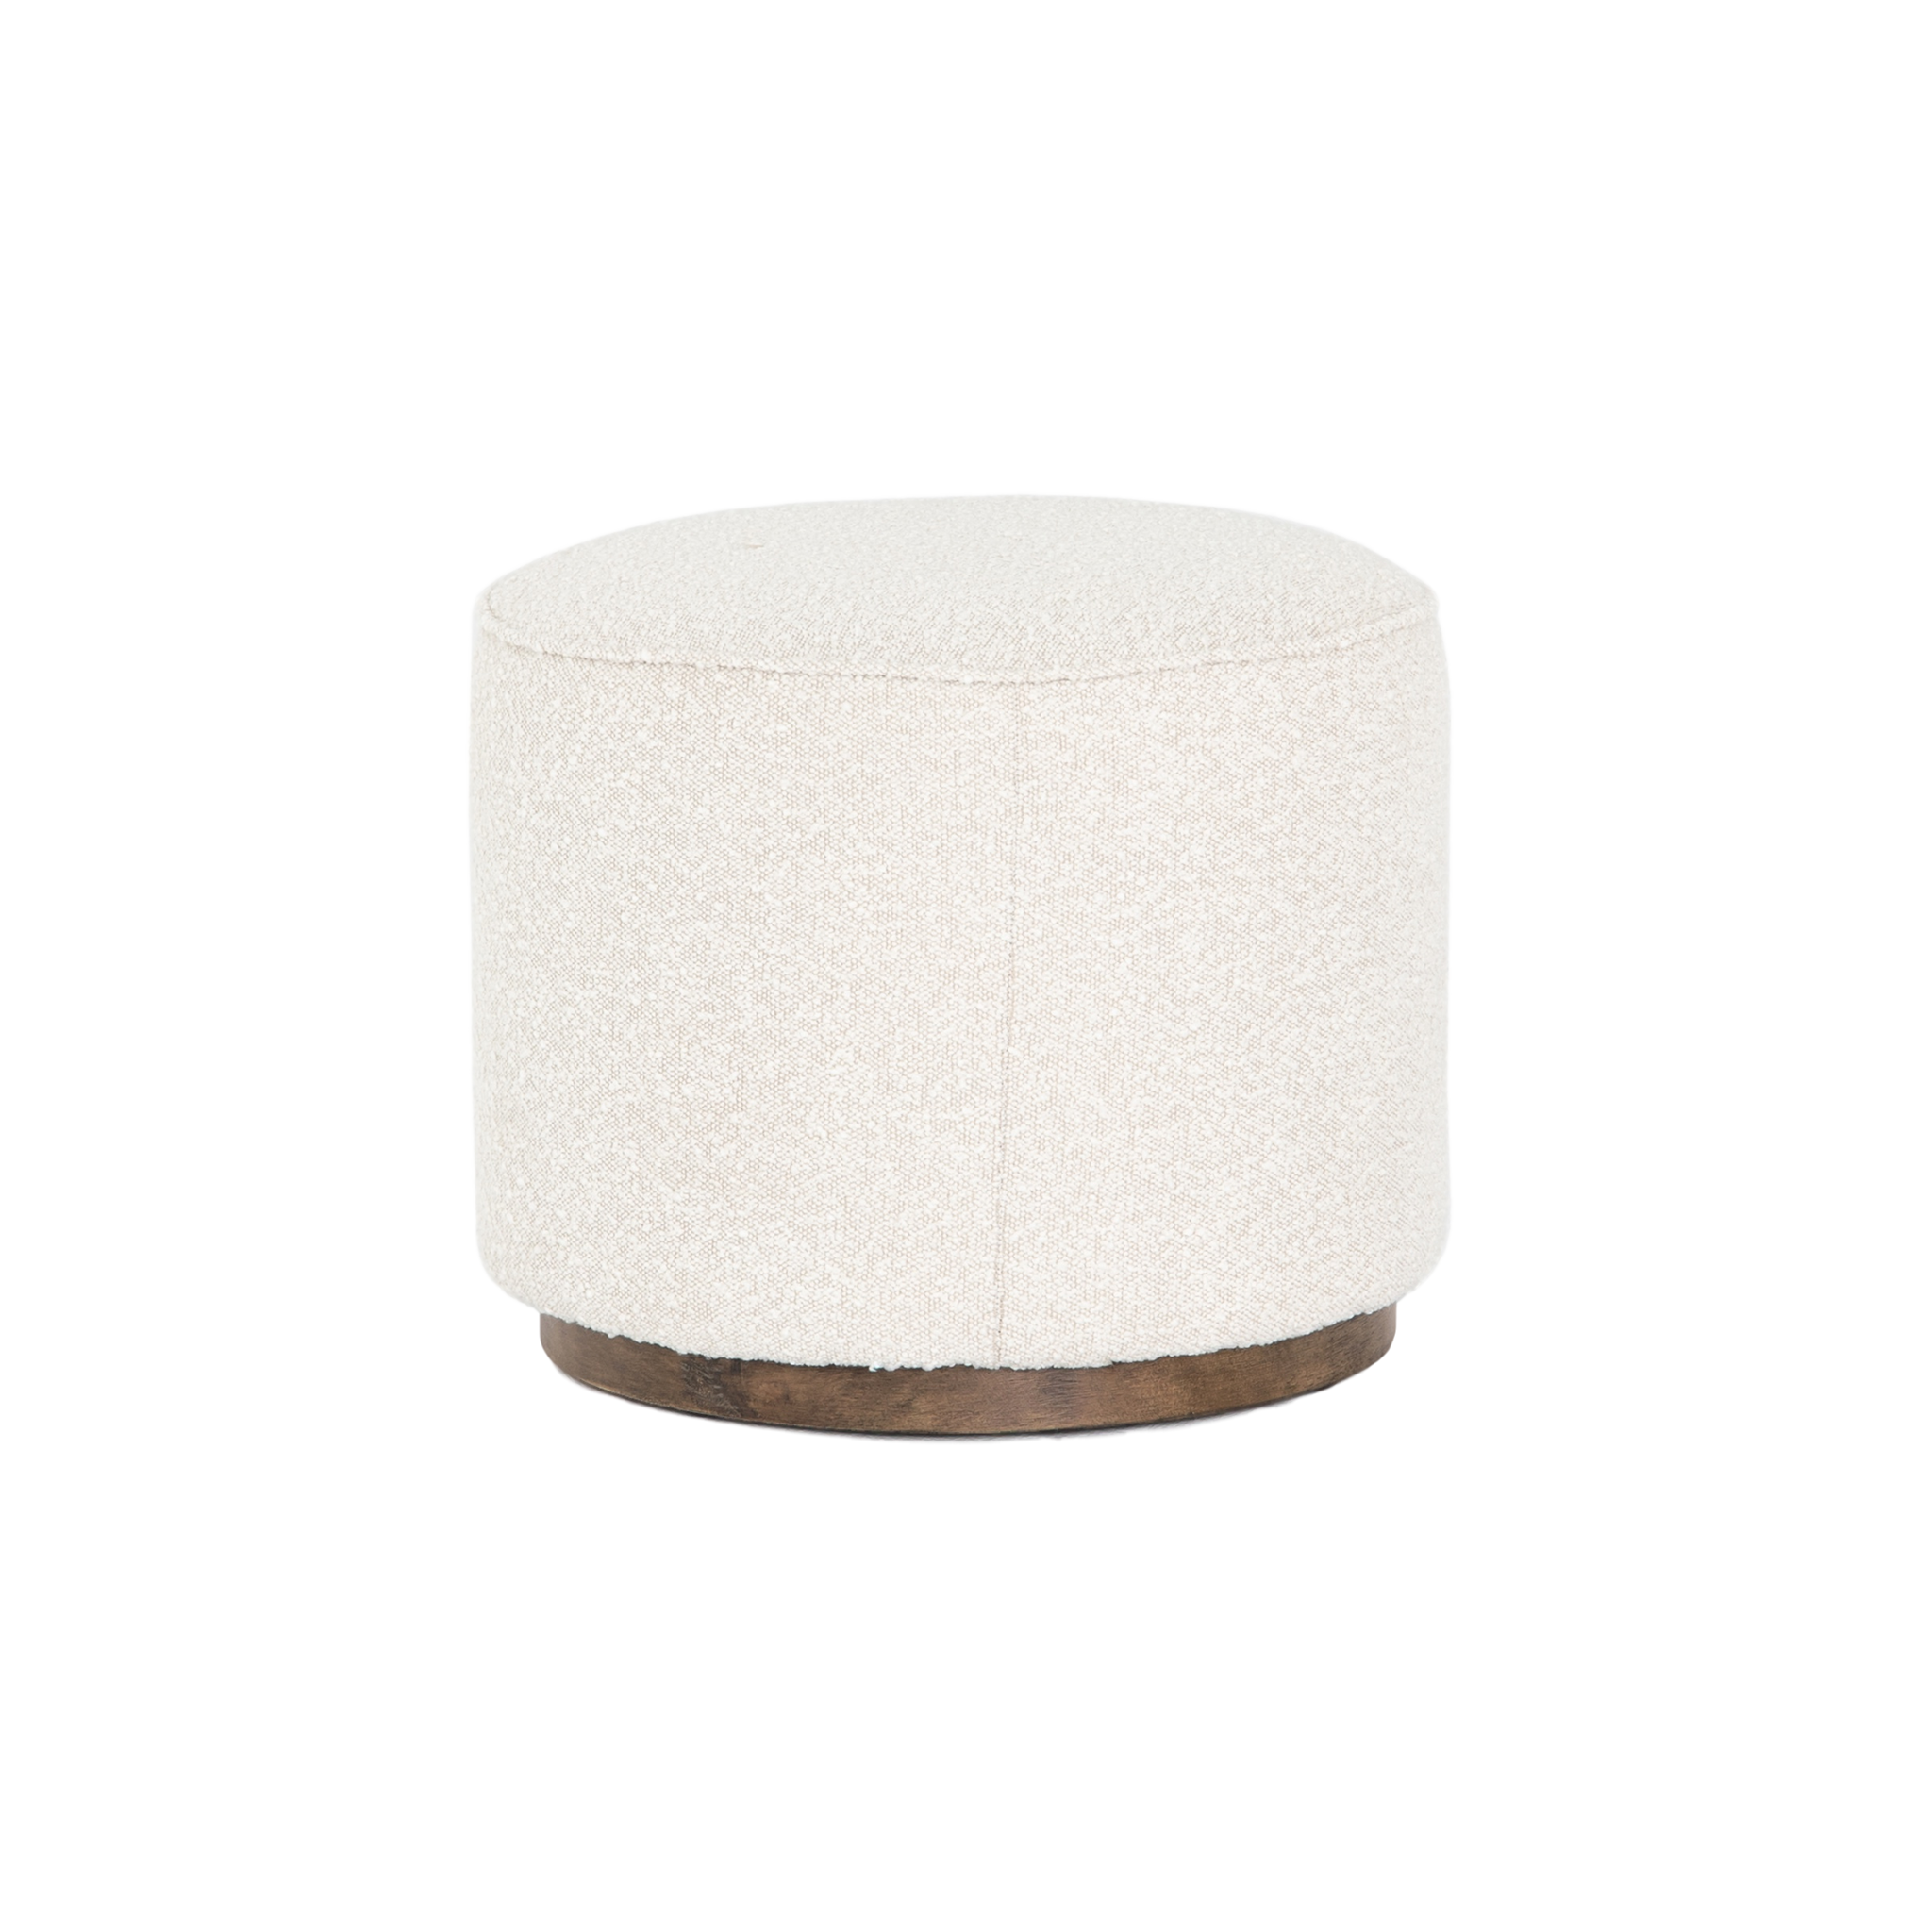 Sinclair Round Ottoman in Knoll Natural